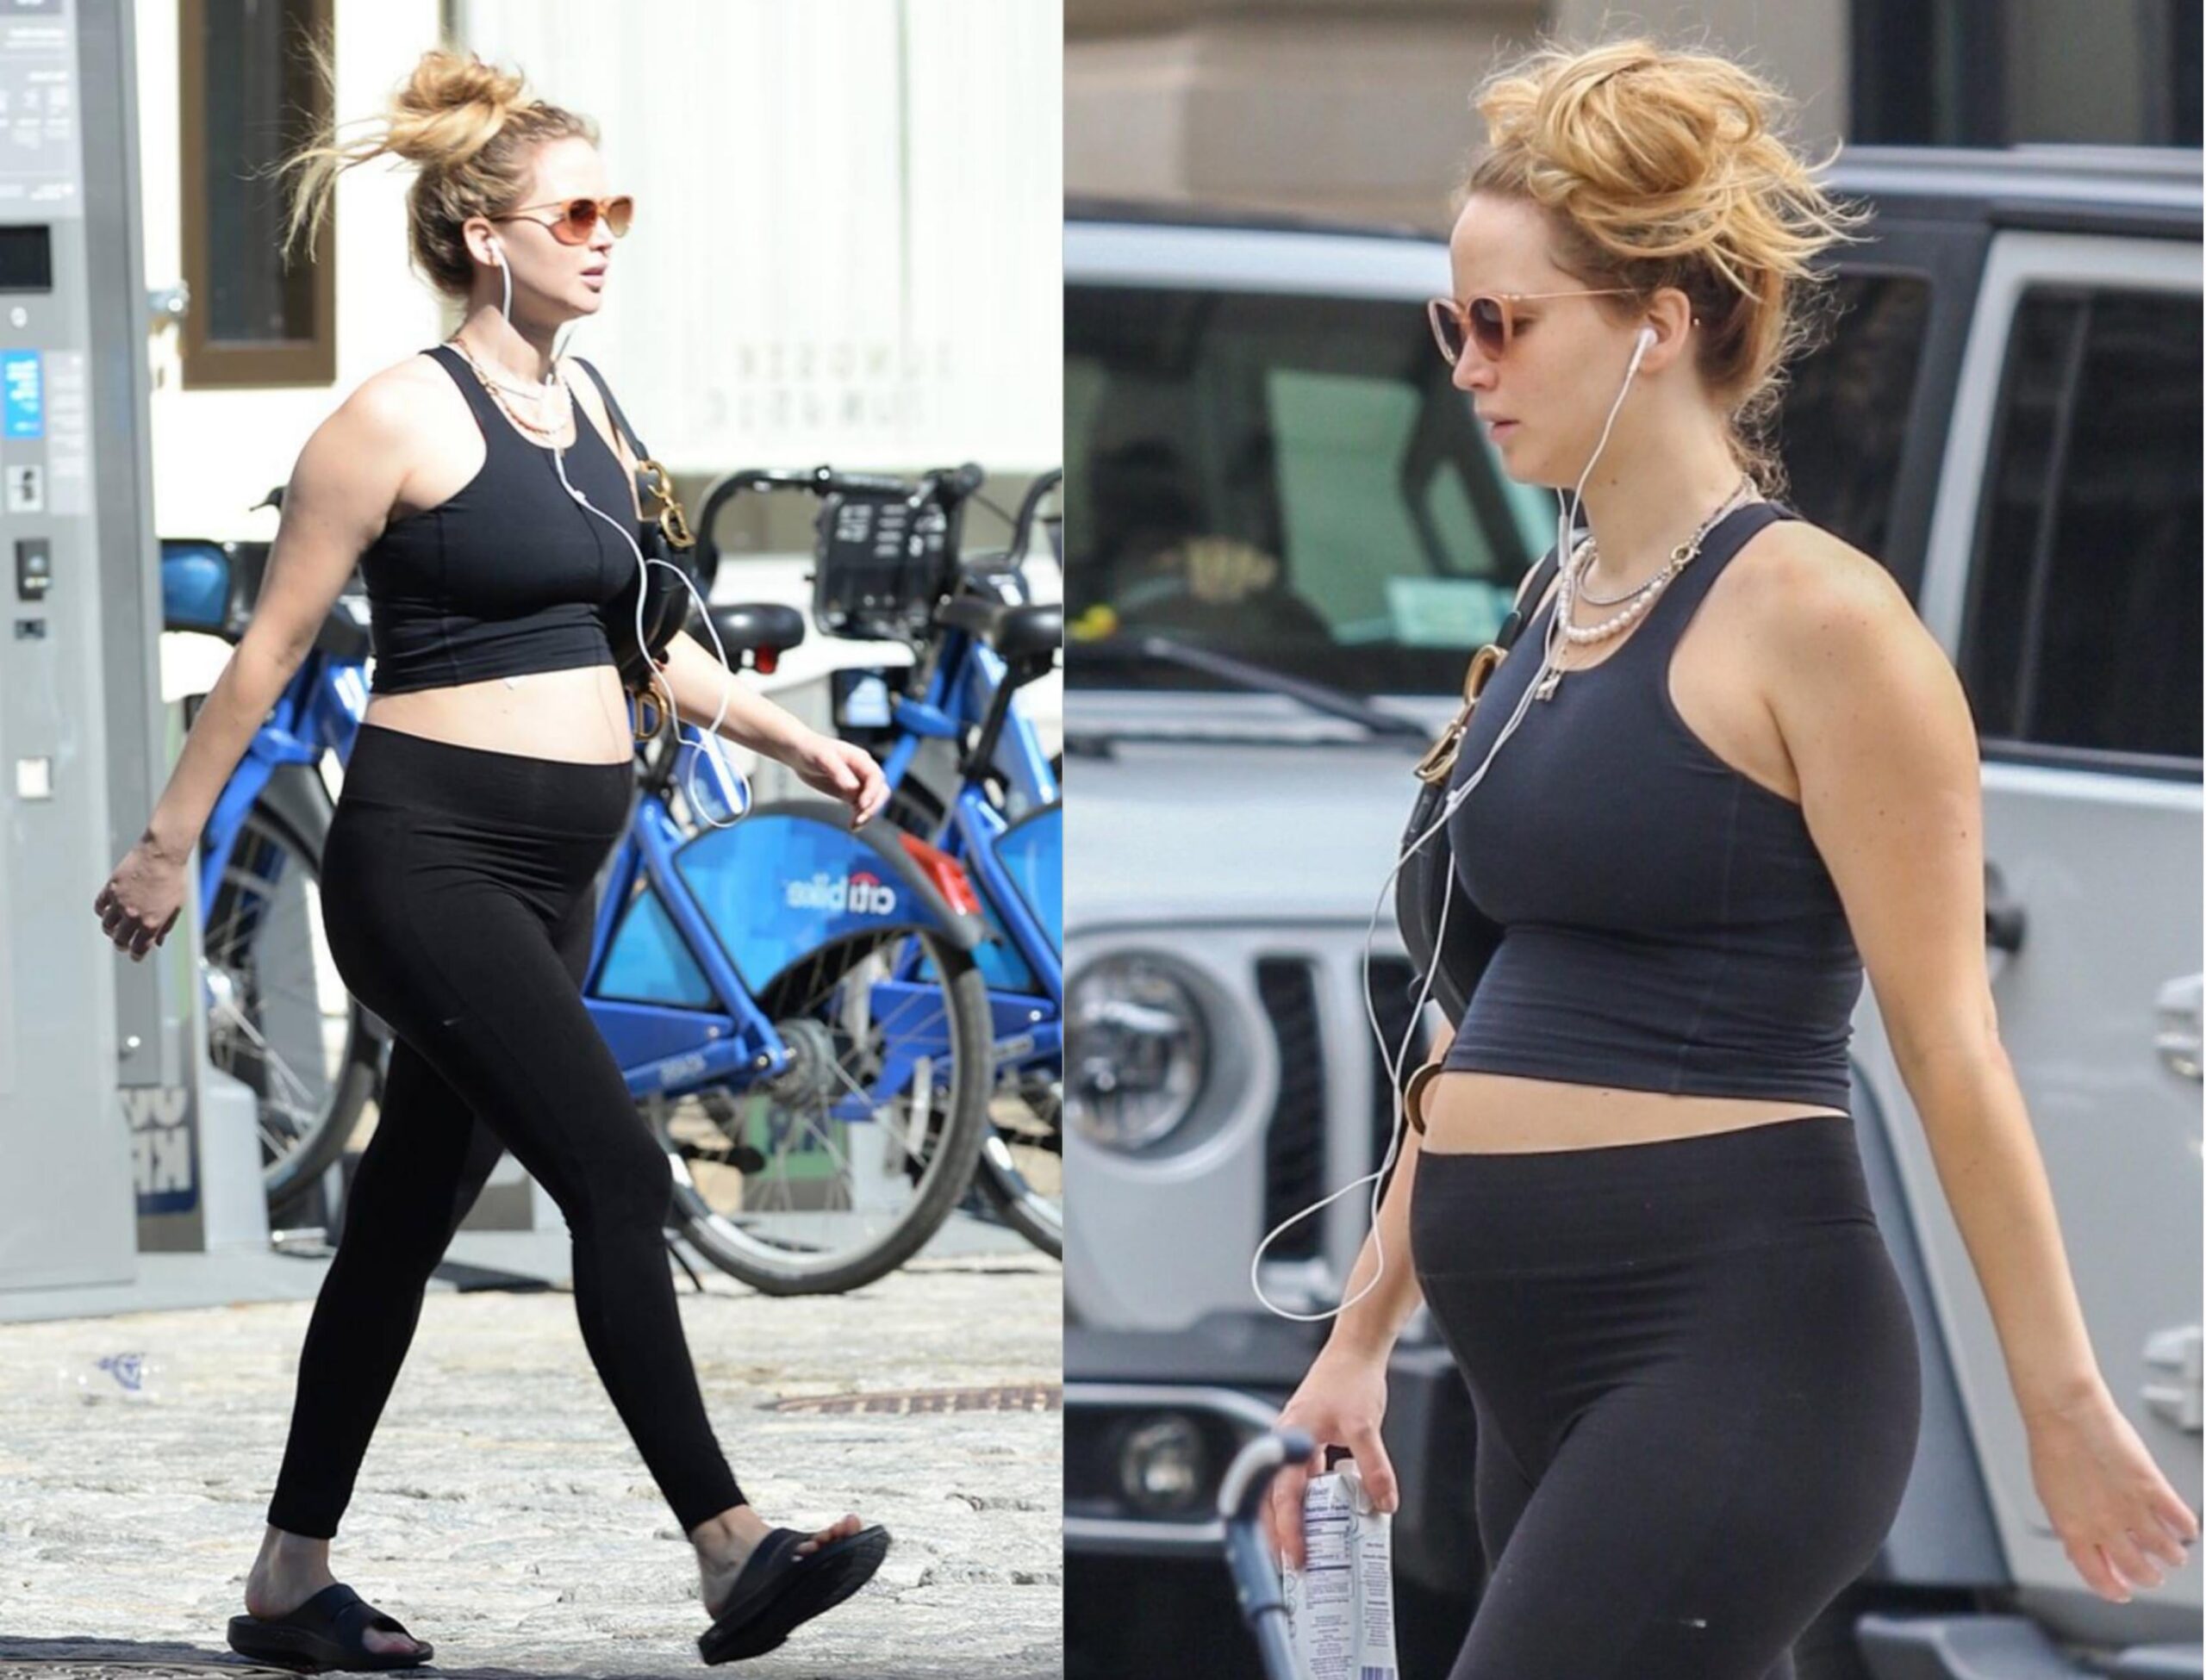 The best part about Jennifer Lawrence getting pregnant is those